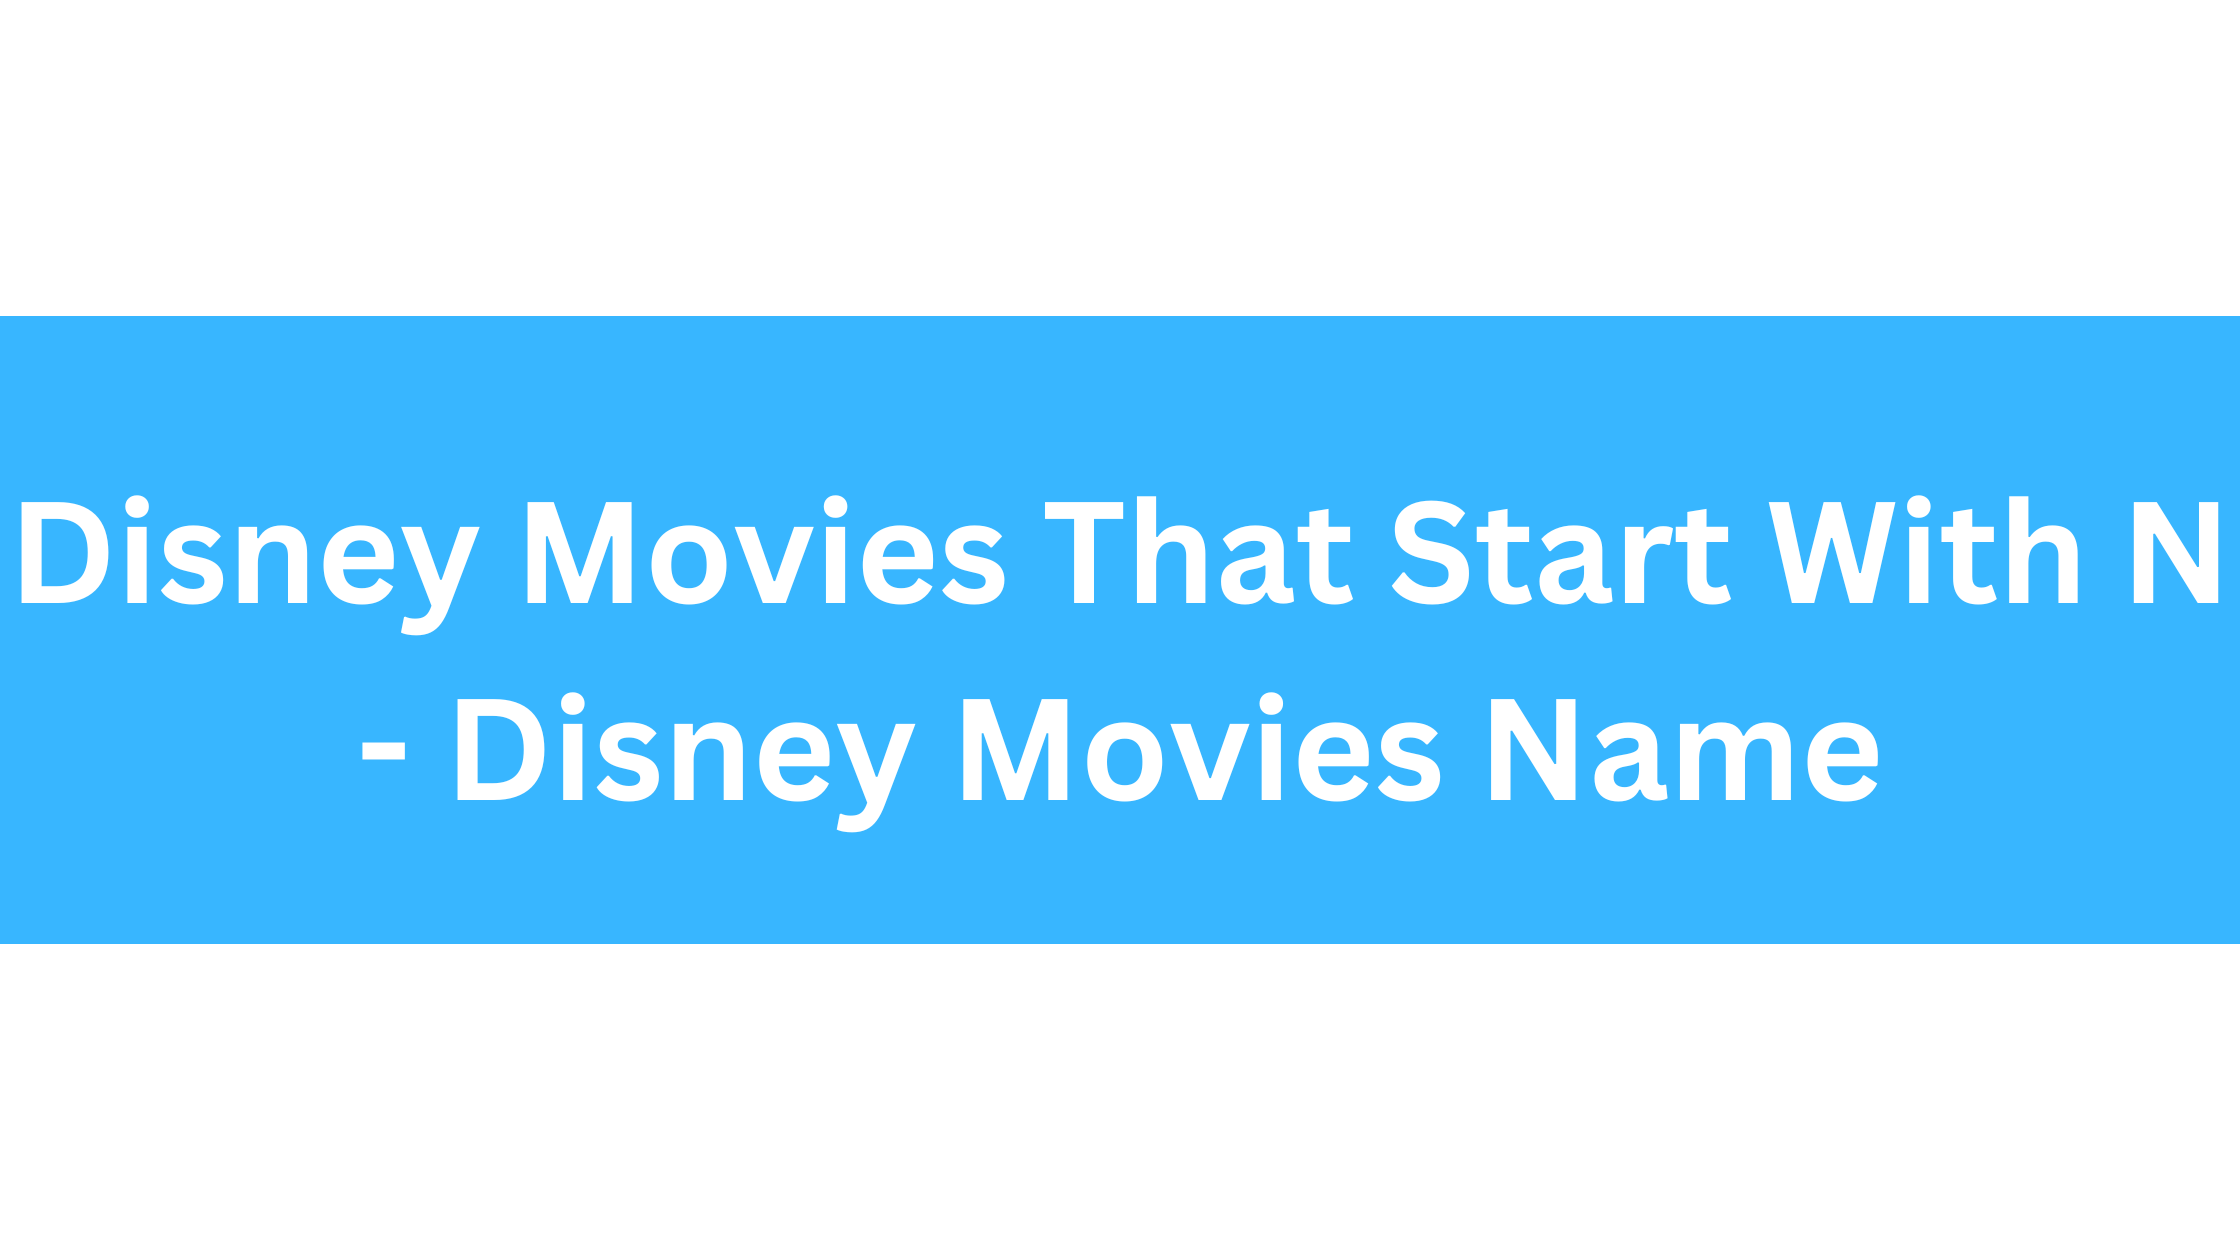 Disney Movies That Start With N